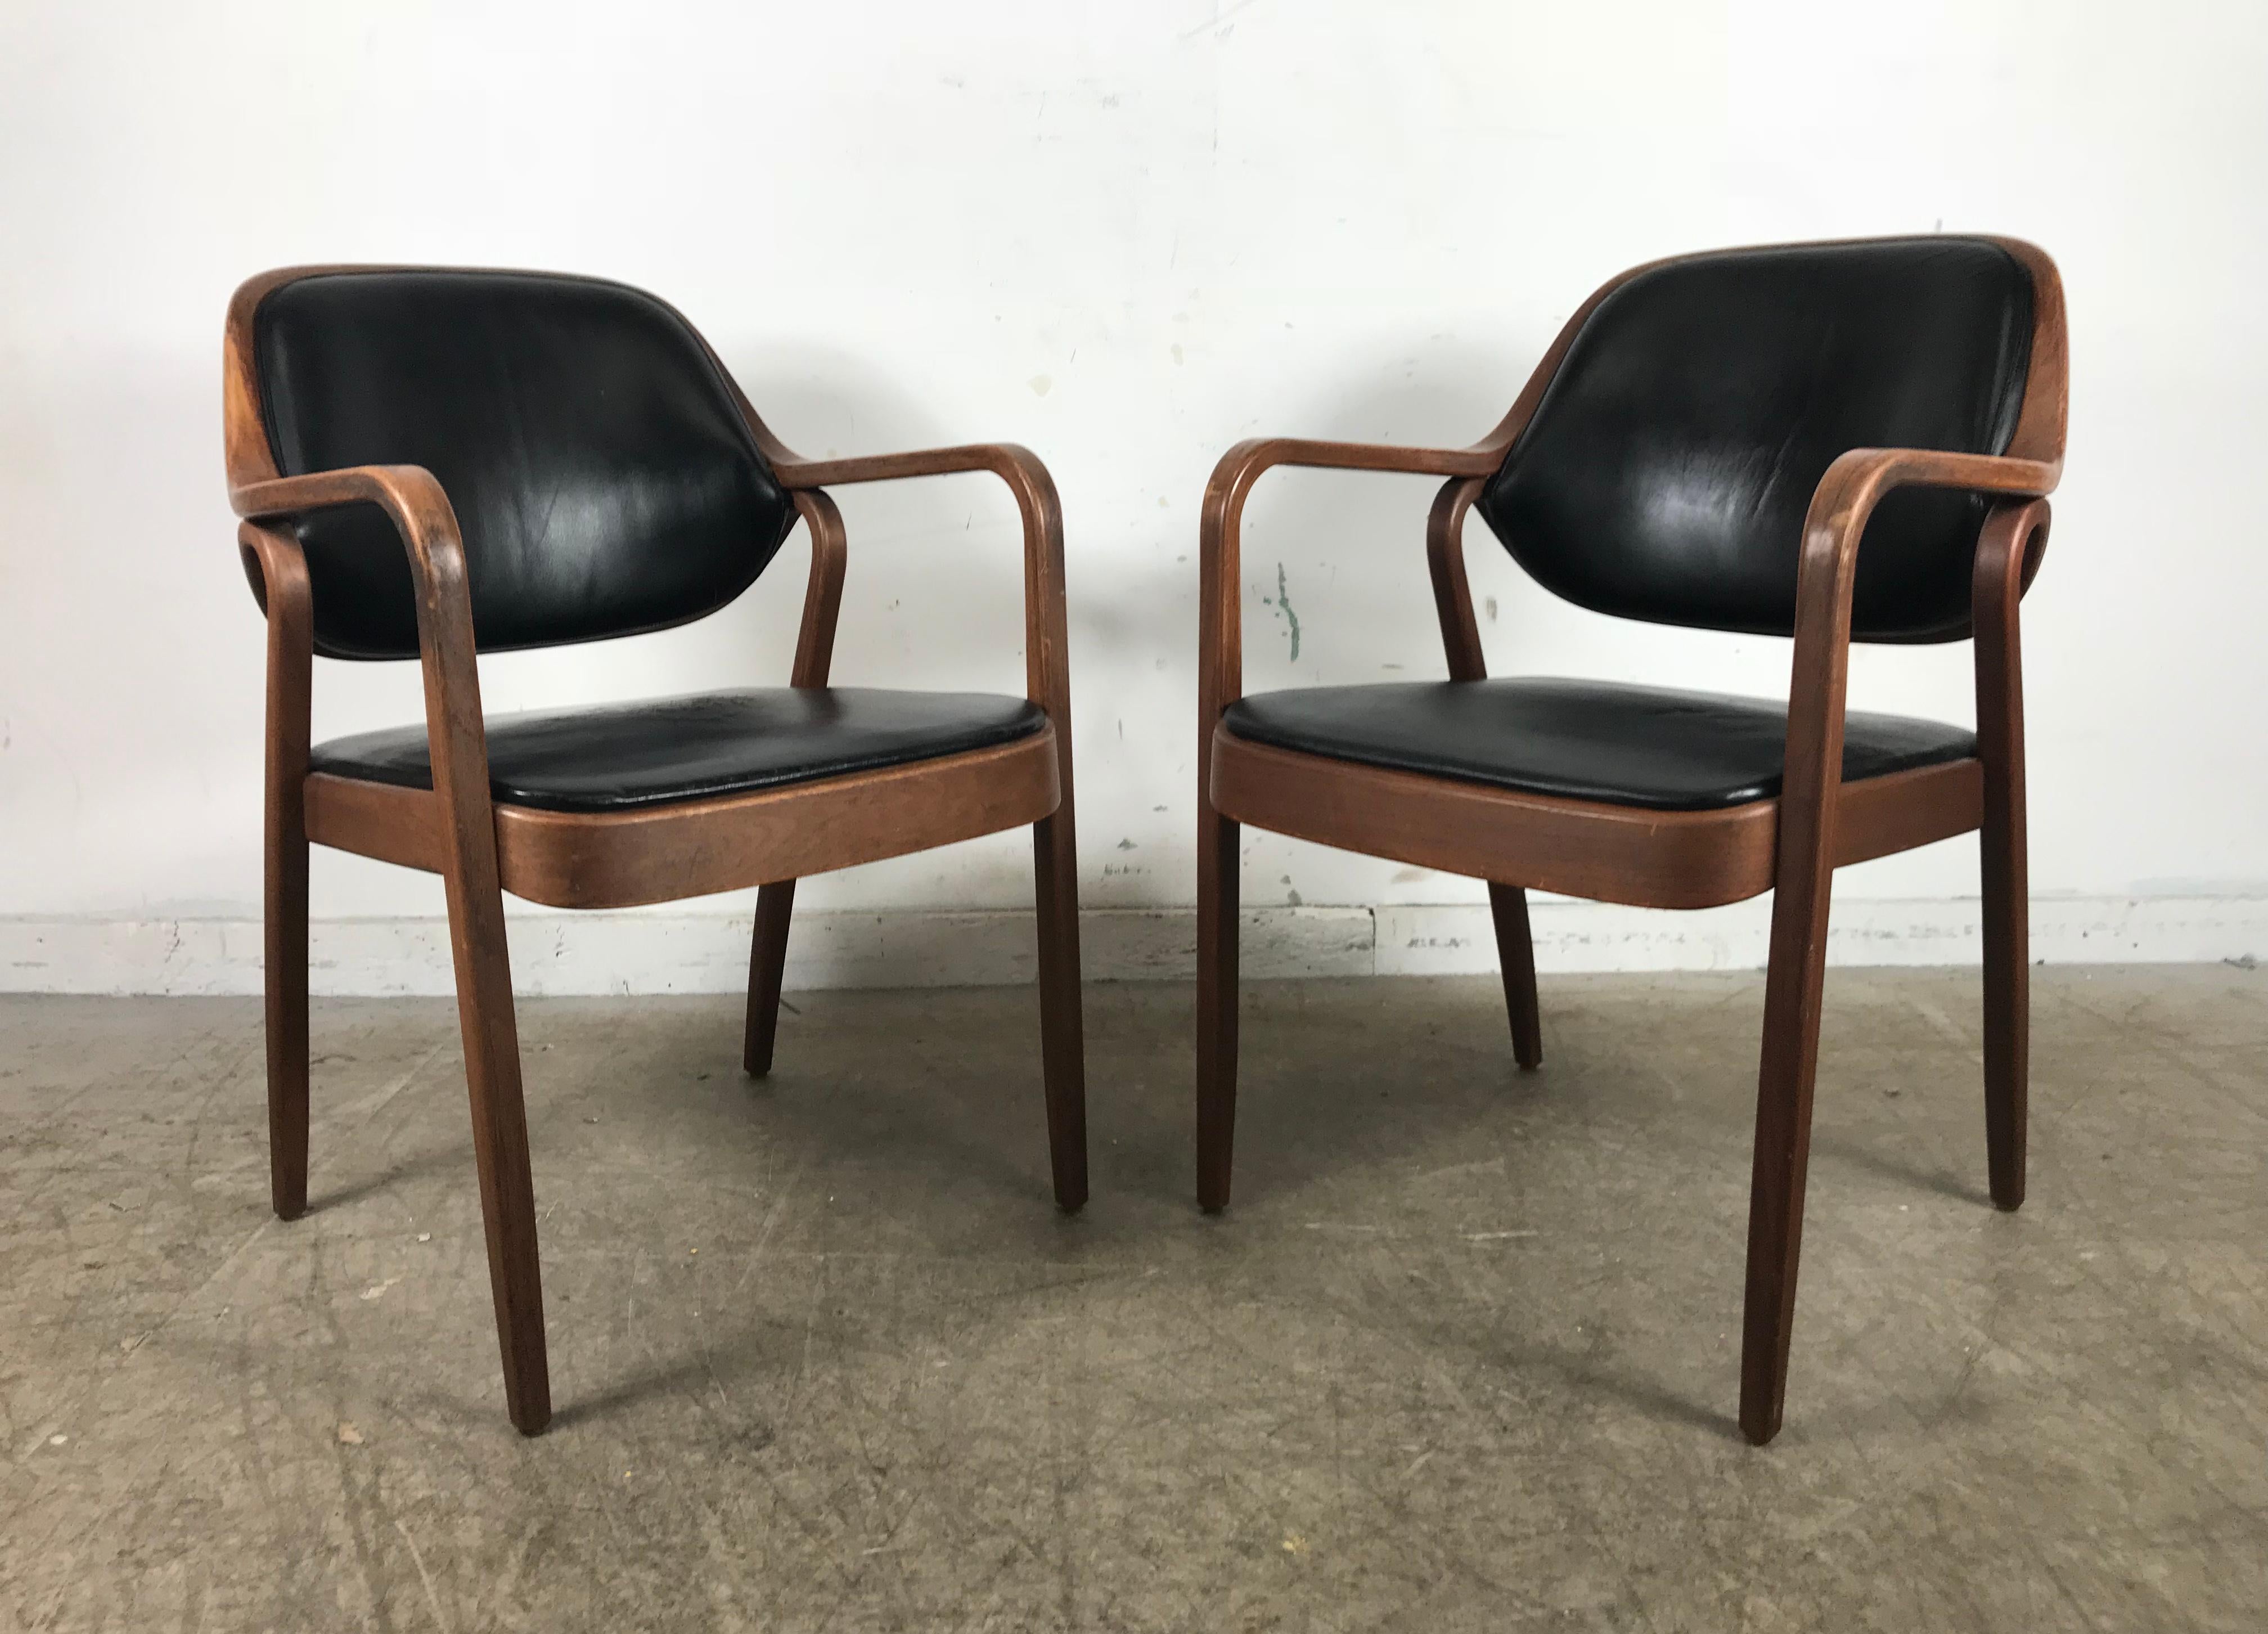 Pair of Modernist Bentwood Mahogany and Leather Chairs by Don Pettit for Knoll 3